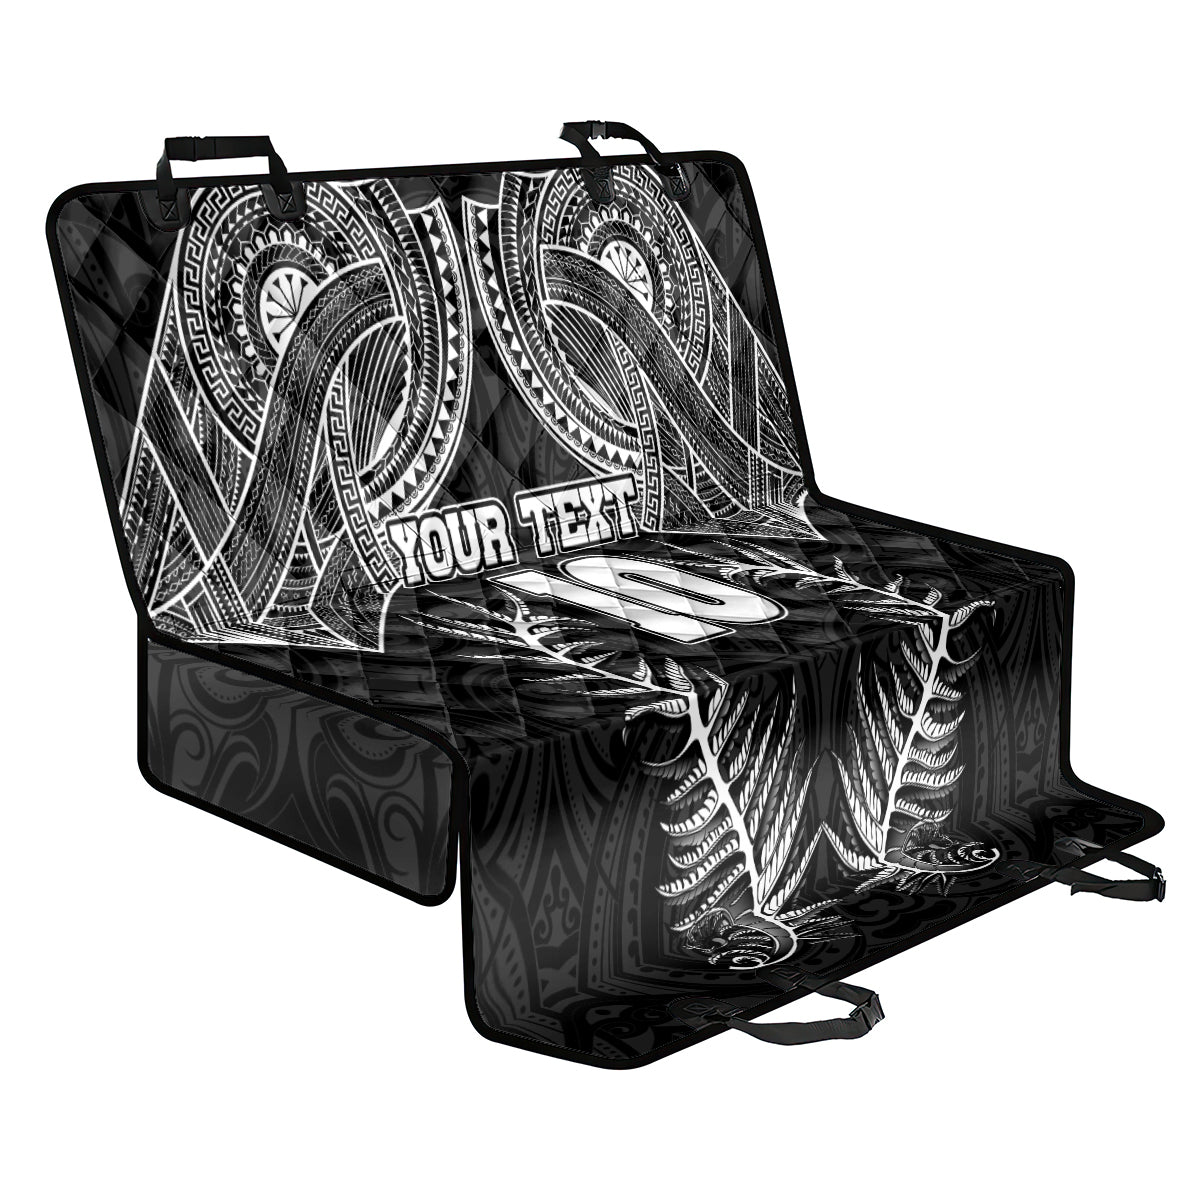 Custom New Zealand Rugby Back Car Seat Cover Aotearoa Champion Cup History with Silver Fern LT03 One Size Black - Polynesian Pride